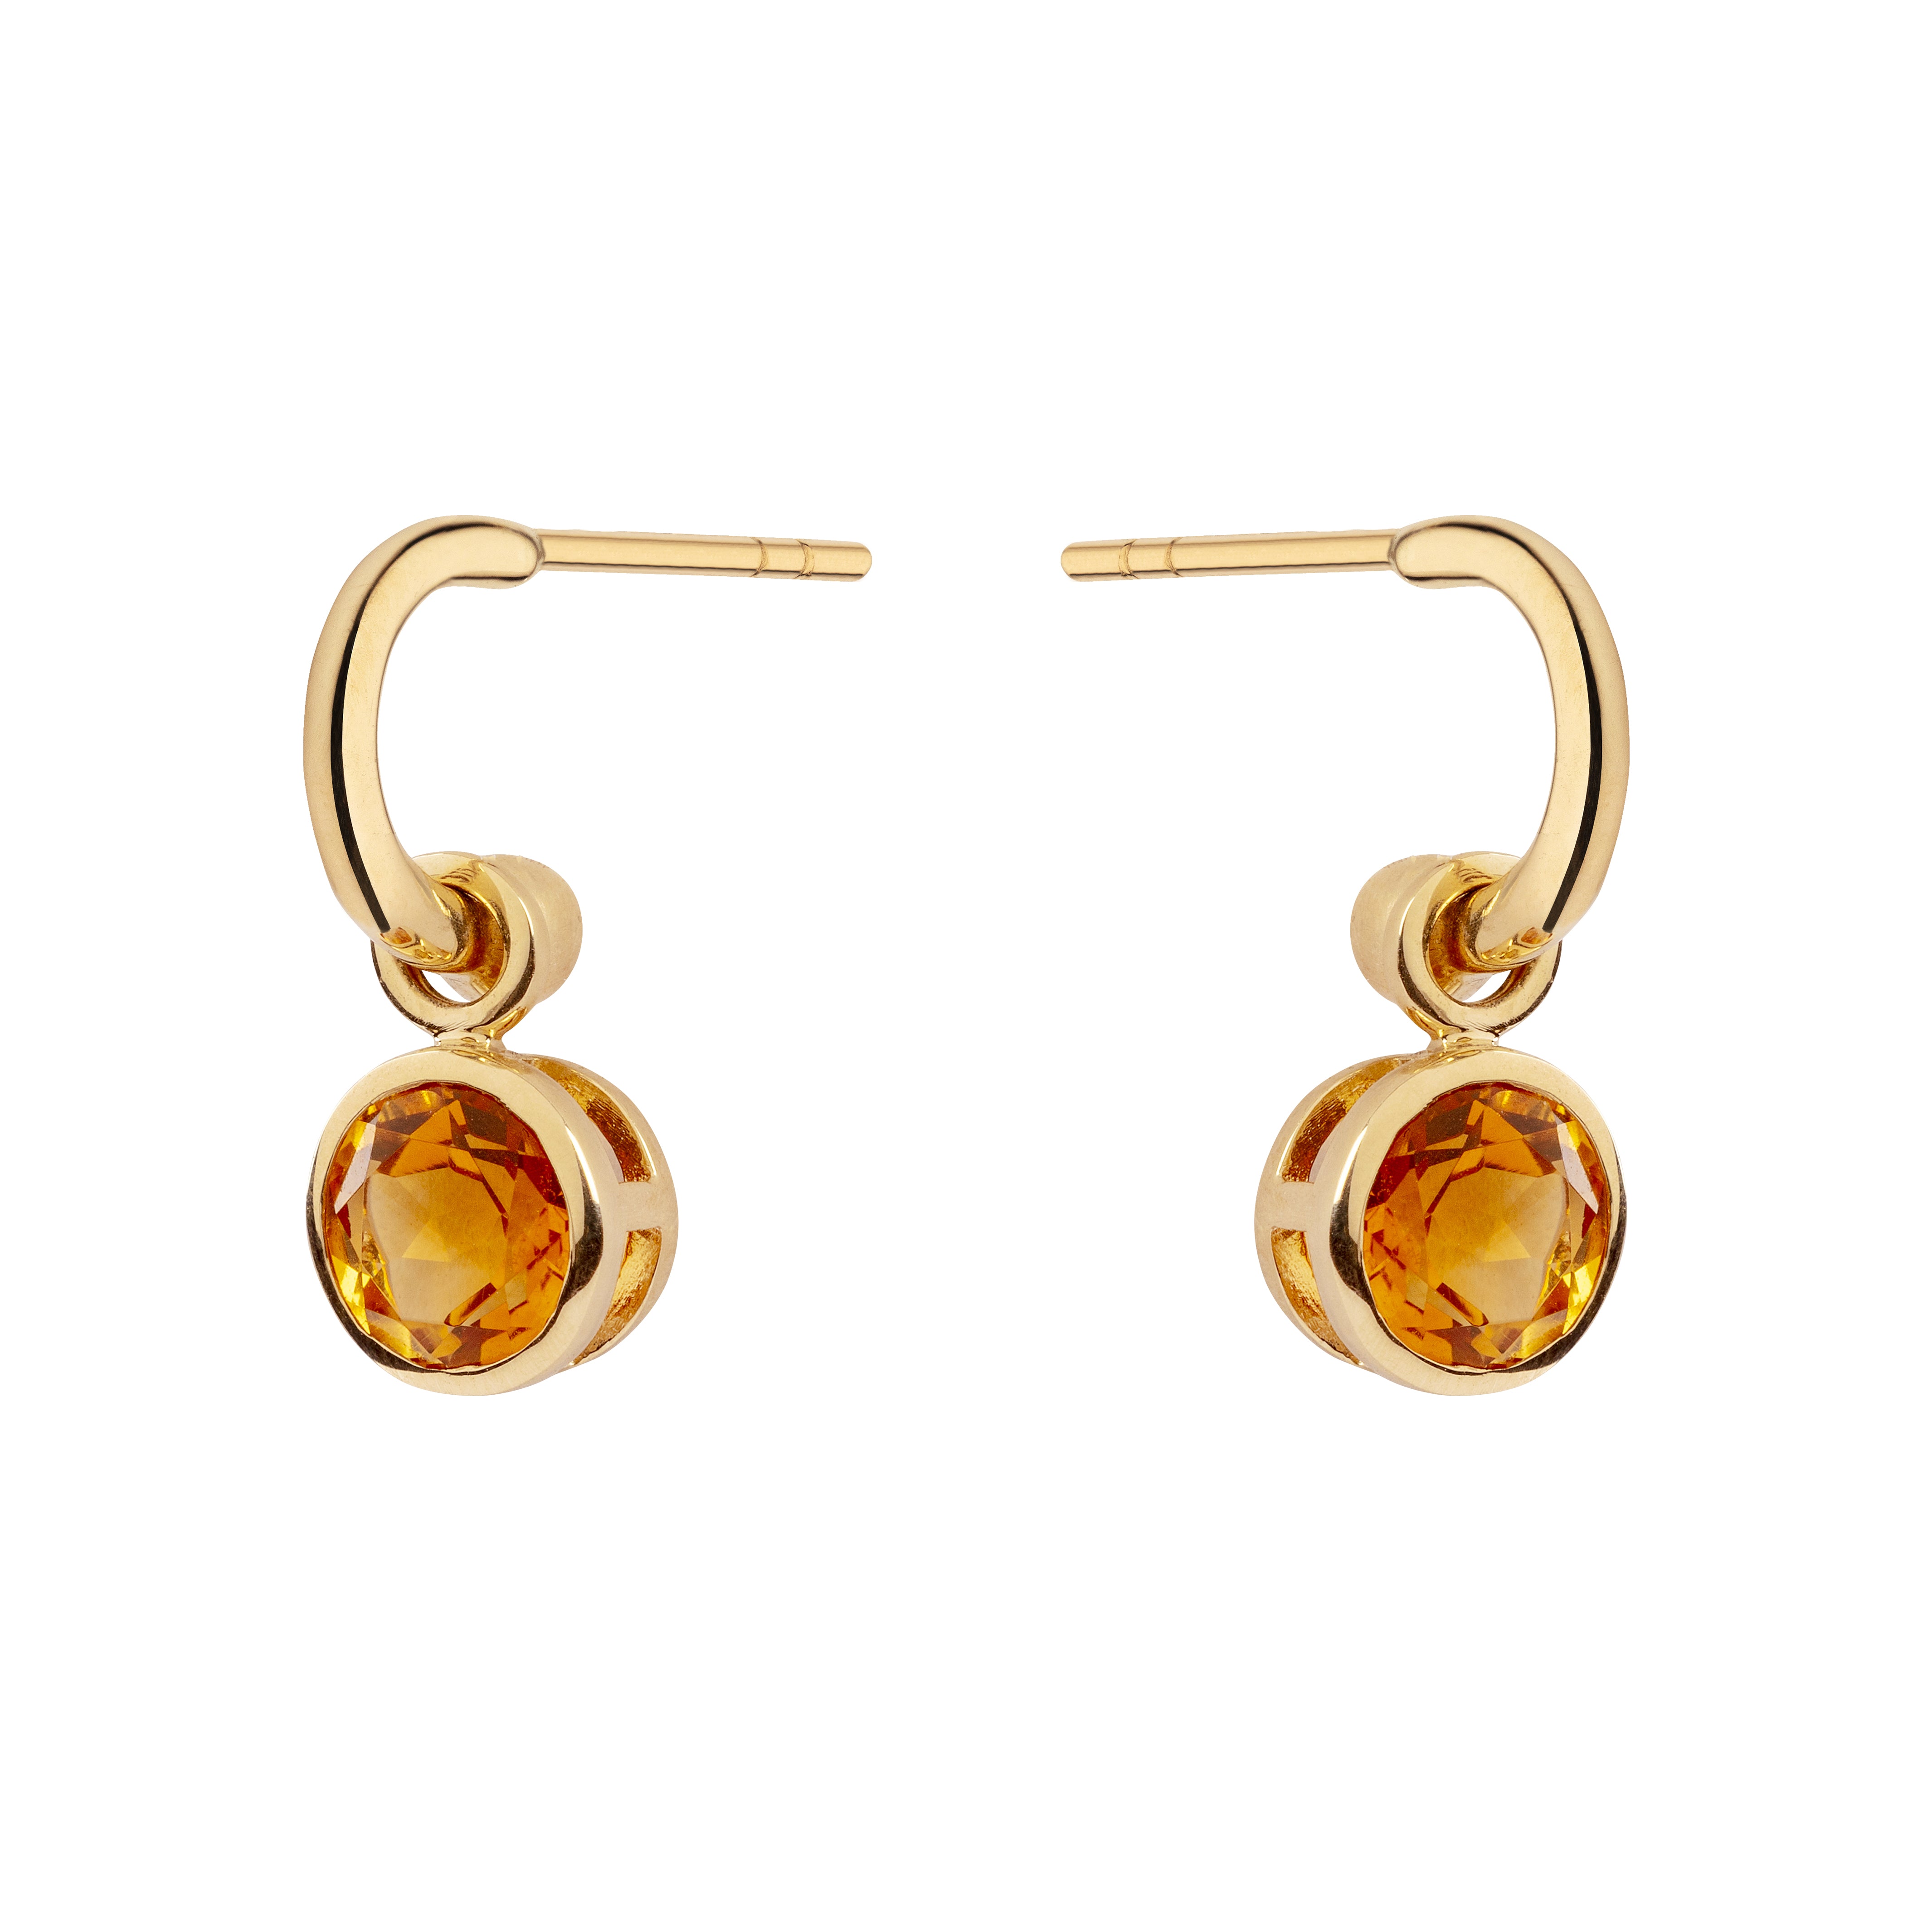 9ct Yellow Gold Hoop Earrings with Detachable Citrine Rounds